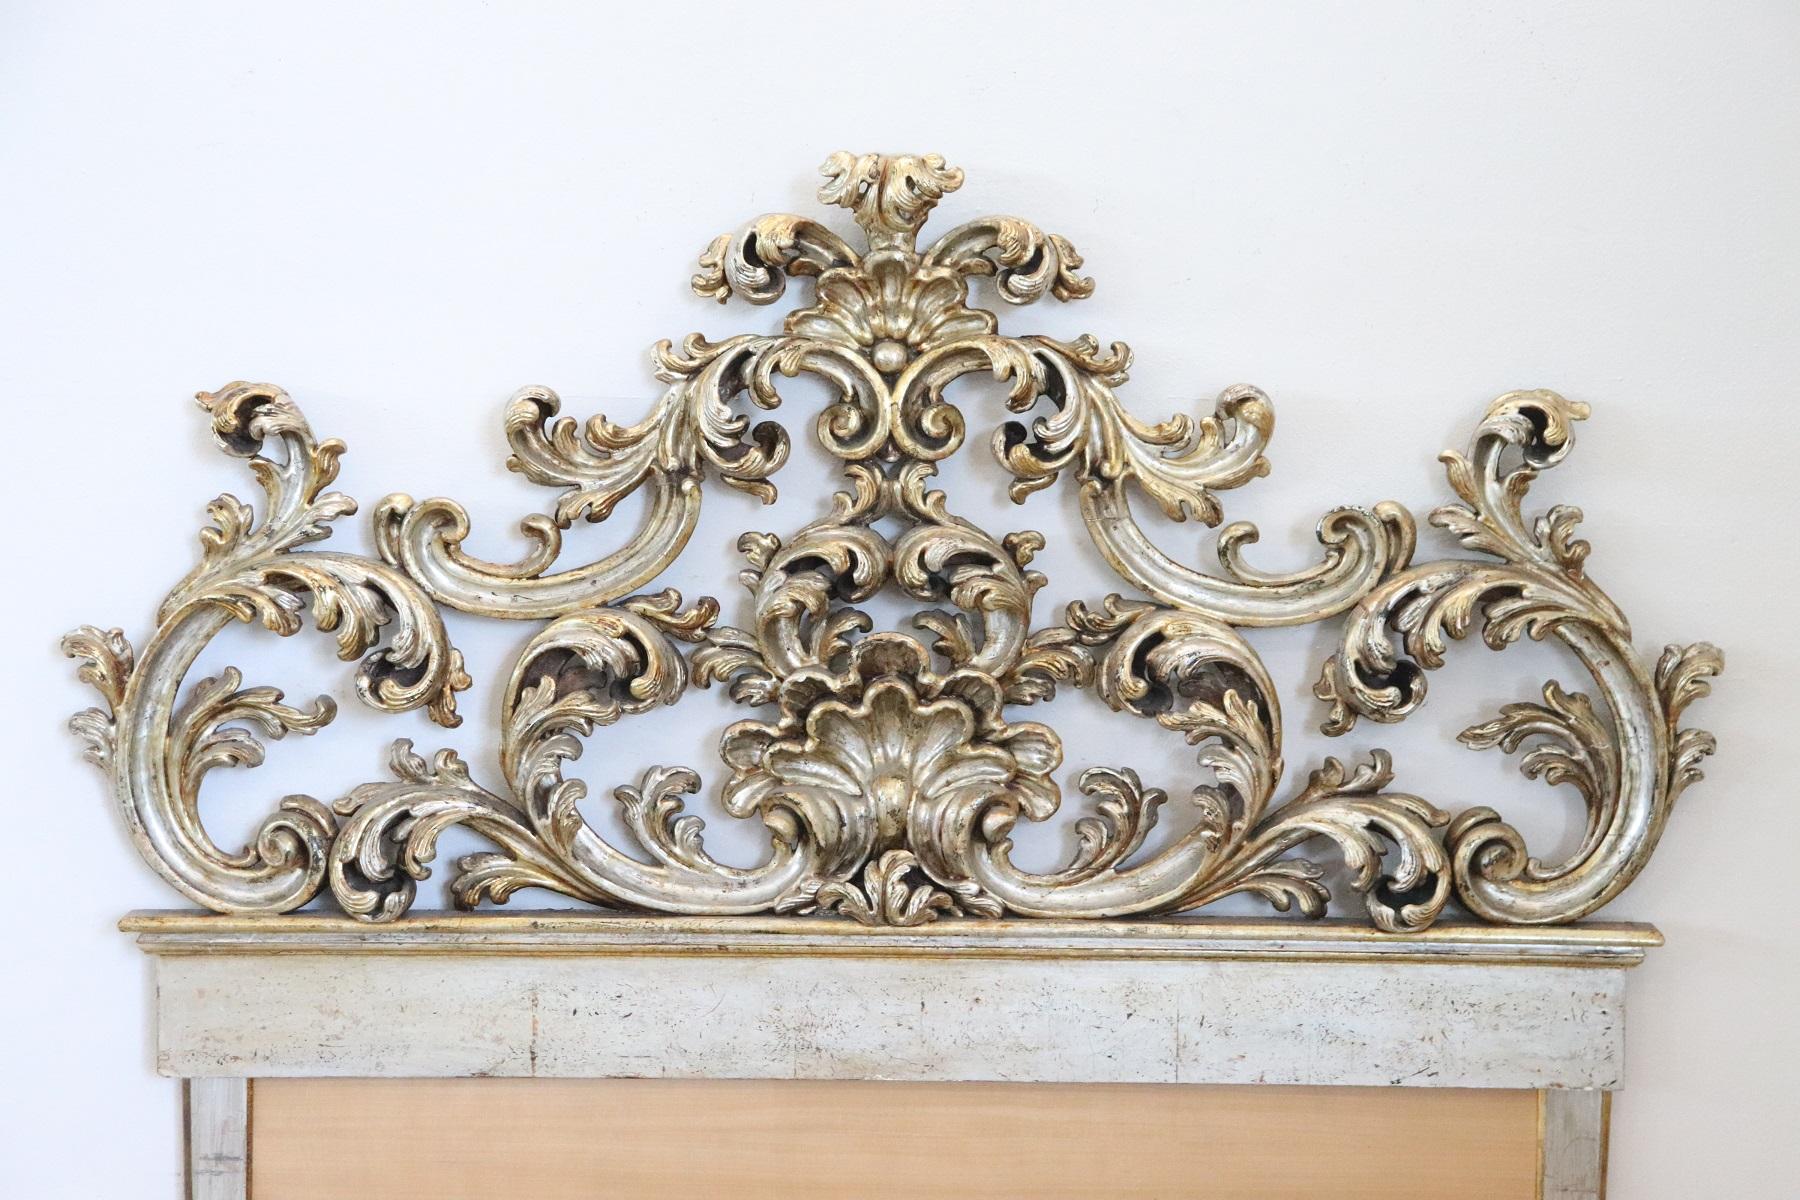 Italian Baroque style double bed. Rich carved gilded and silvered wood. Great woodwork with lots of curls and swirls of typical Italian Baroque taste. The measurements shown are external.